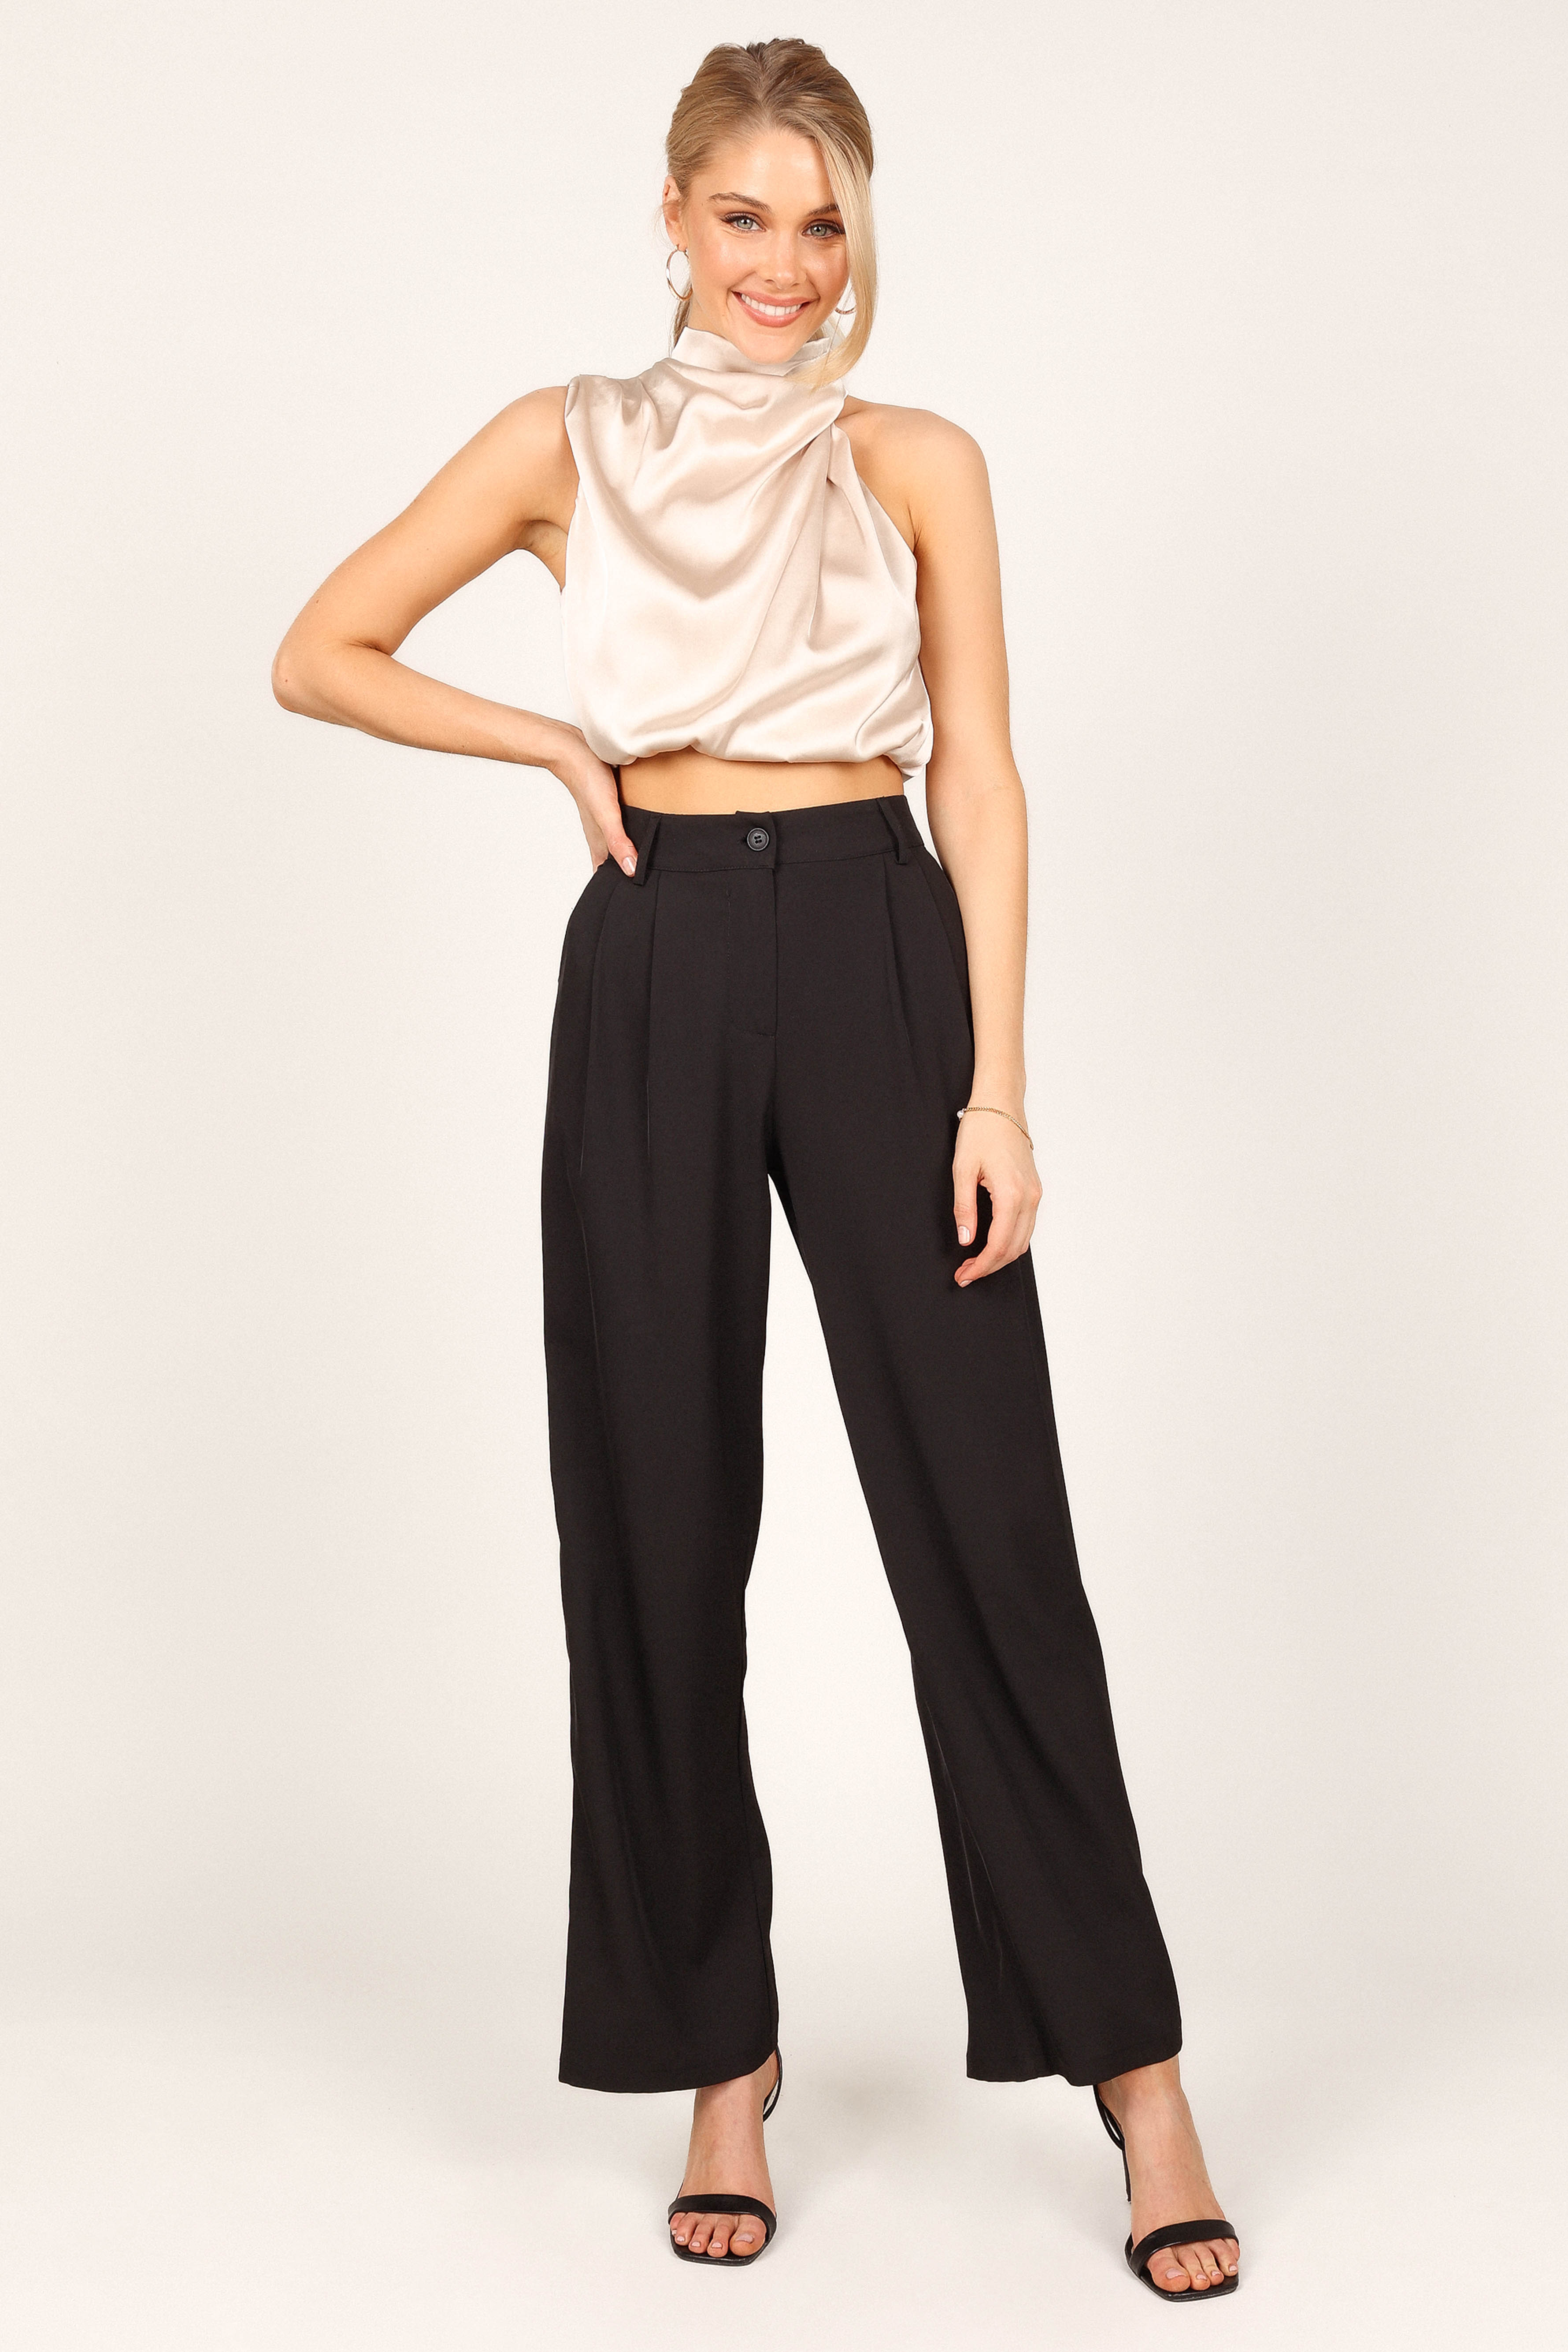 Buy Oyster Tailored Pant Black Online | New Zealand